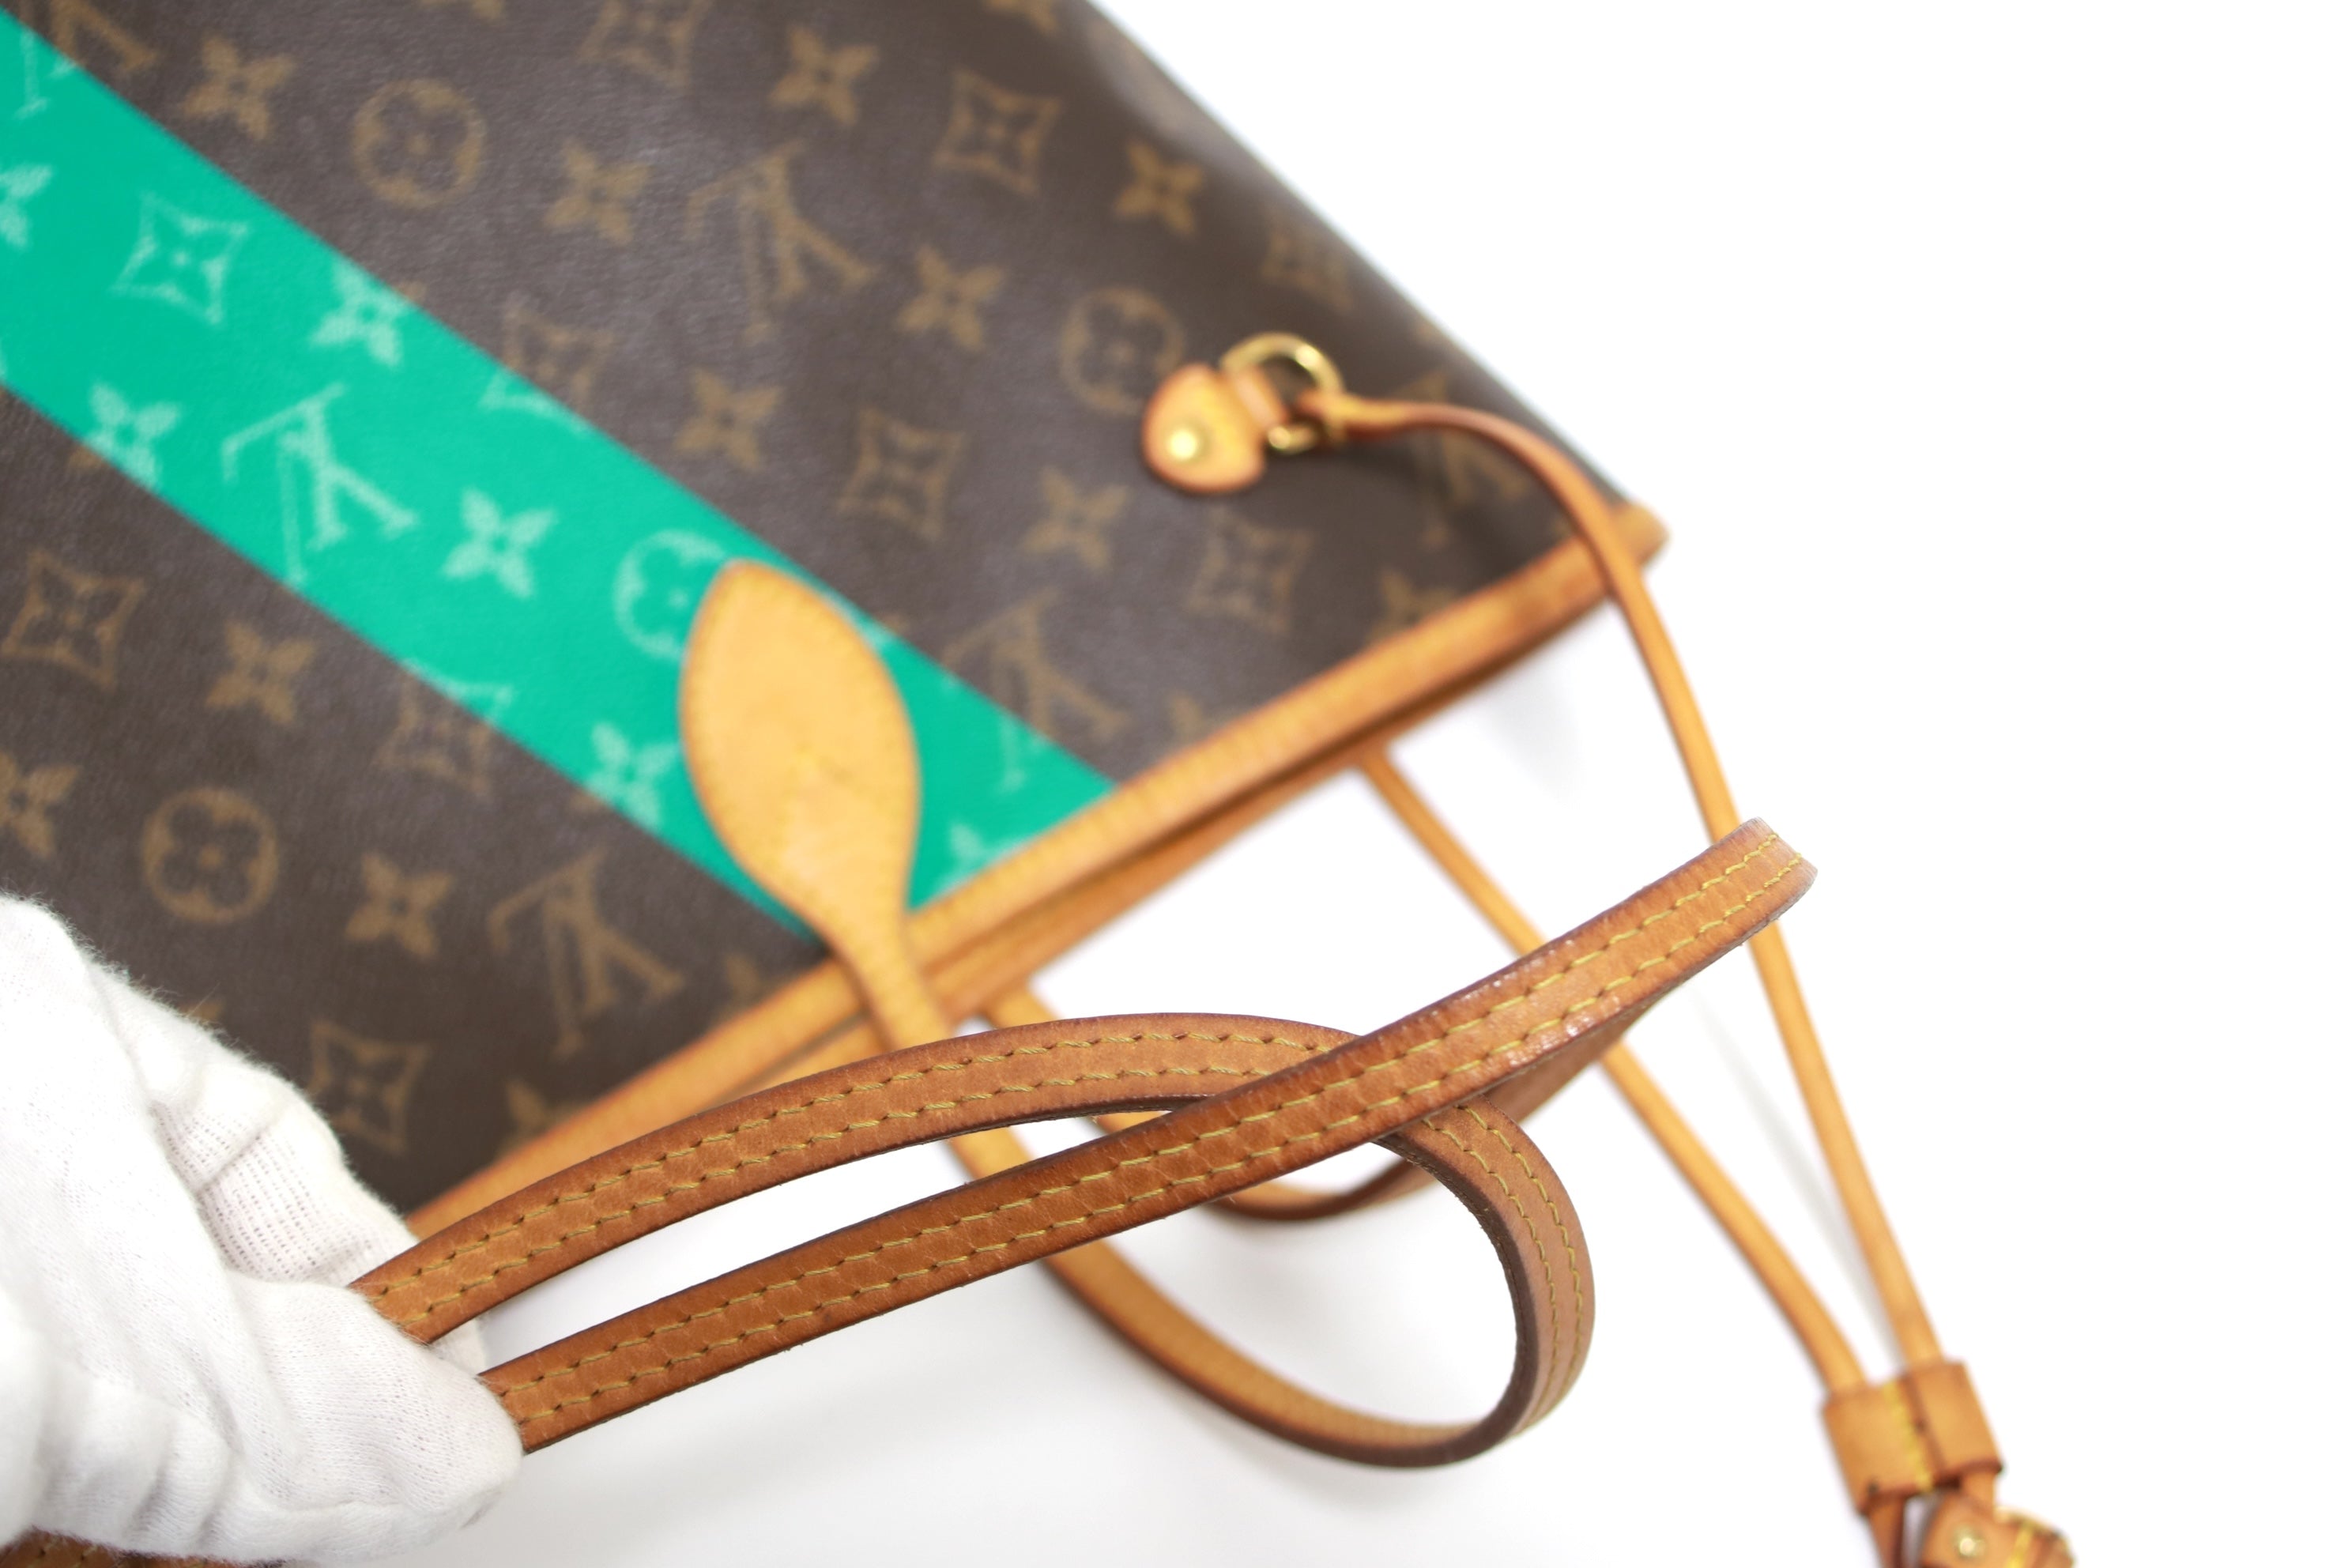 Louis Vuitton Limited Edition Neverfull MM V Turquoise Shoulder Bag Used (7747)